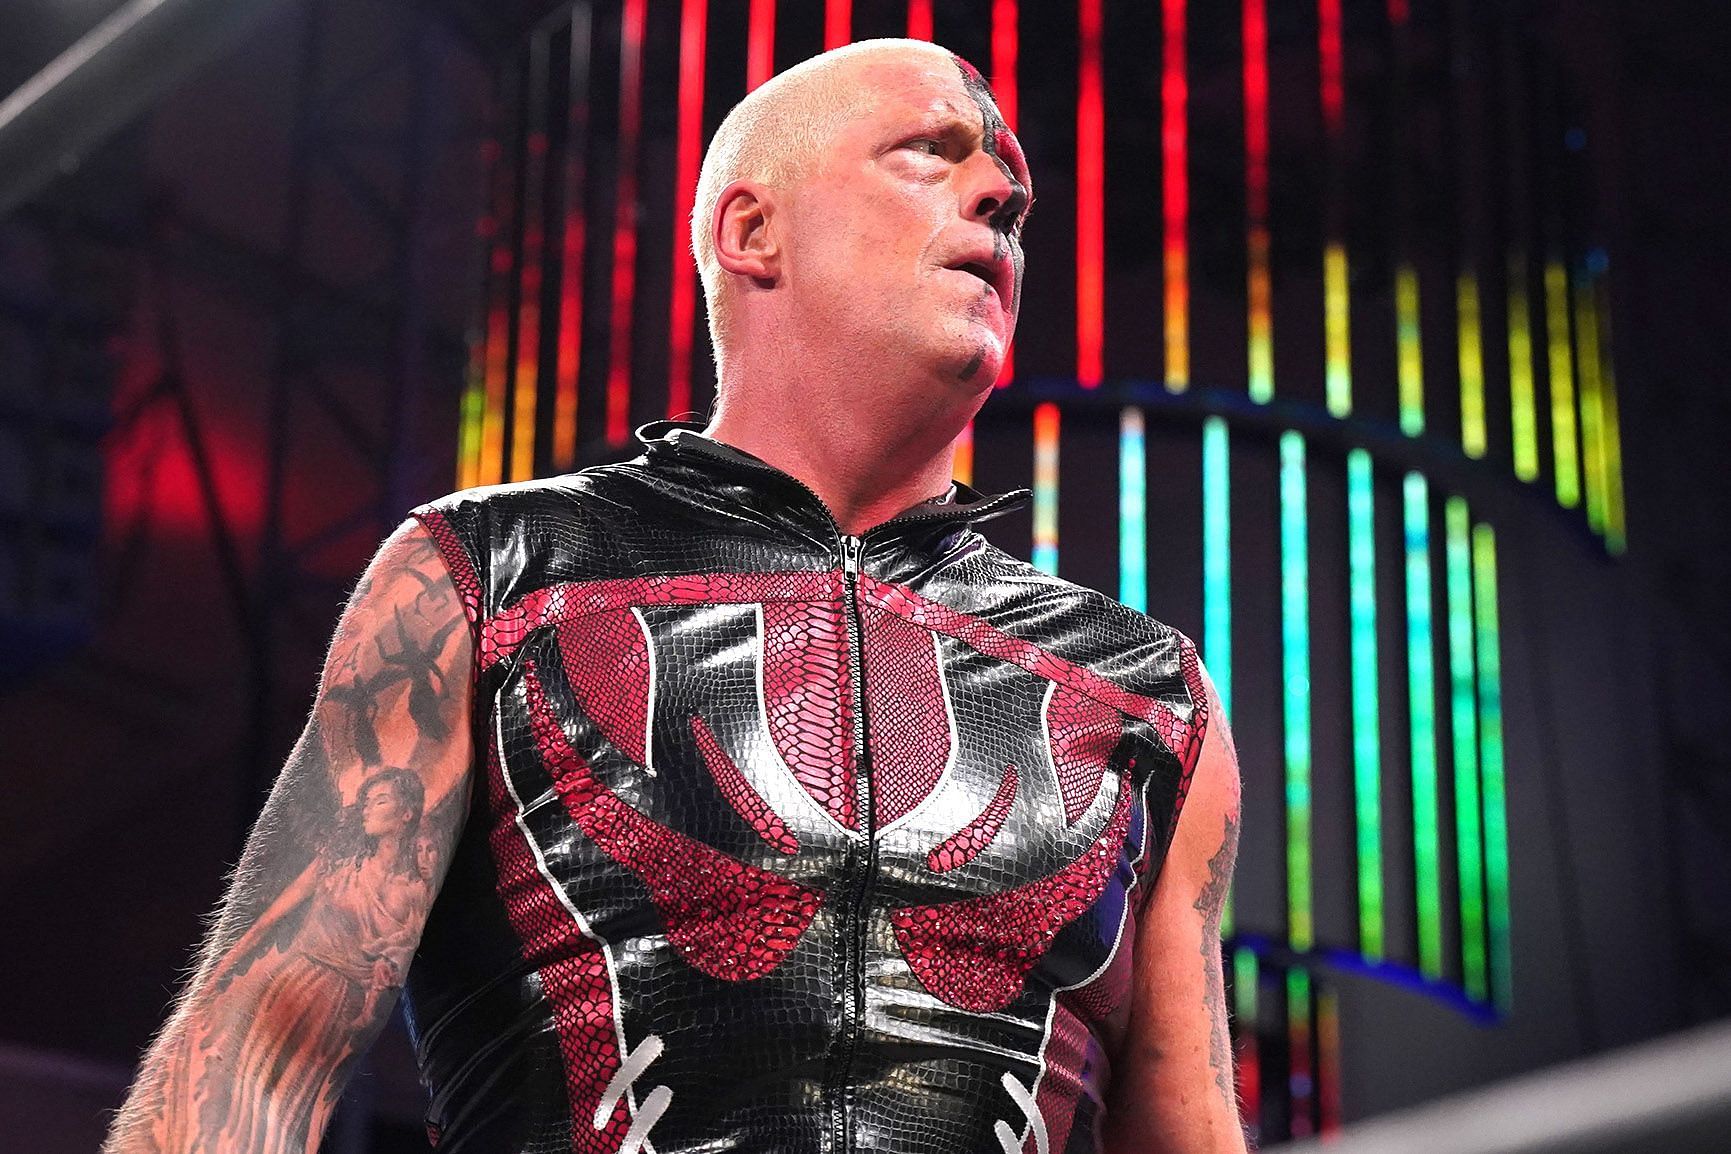 Dustin Rhodes has found considerable success in AEW